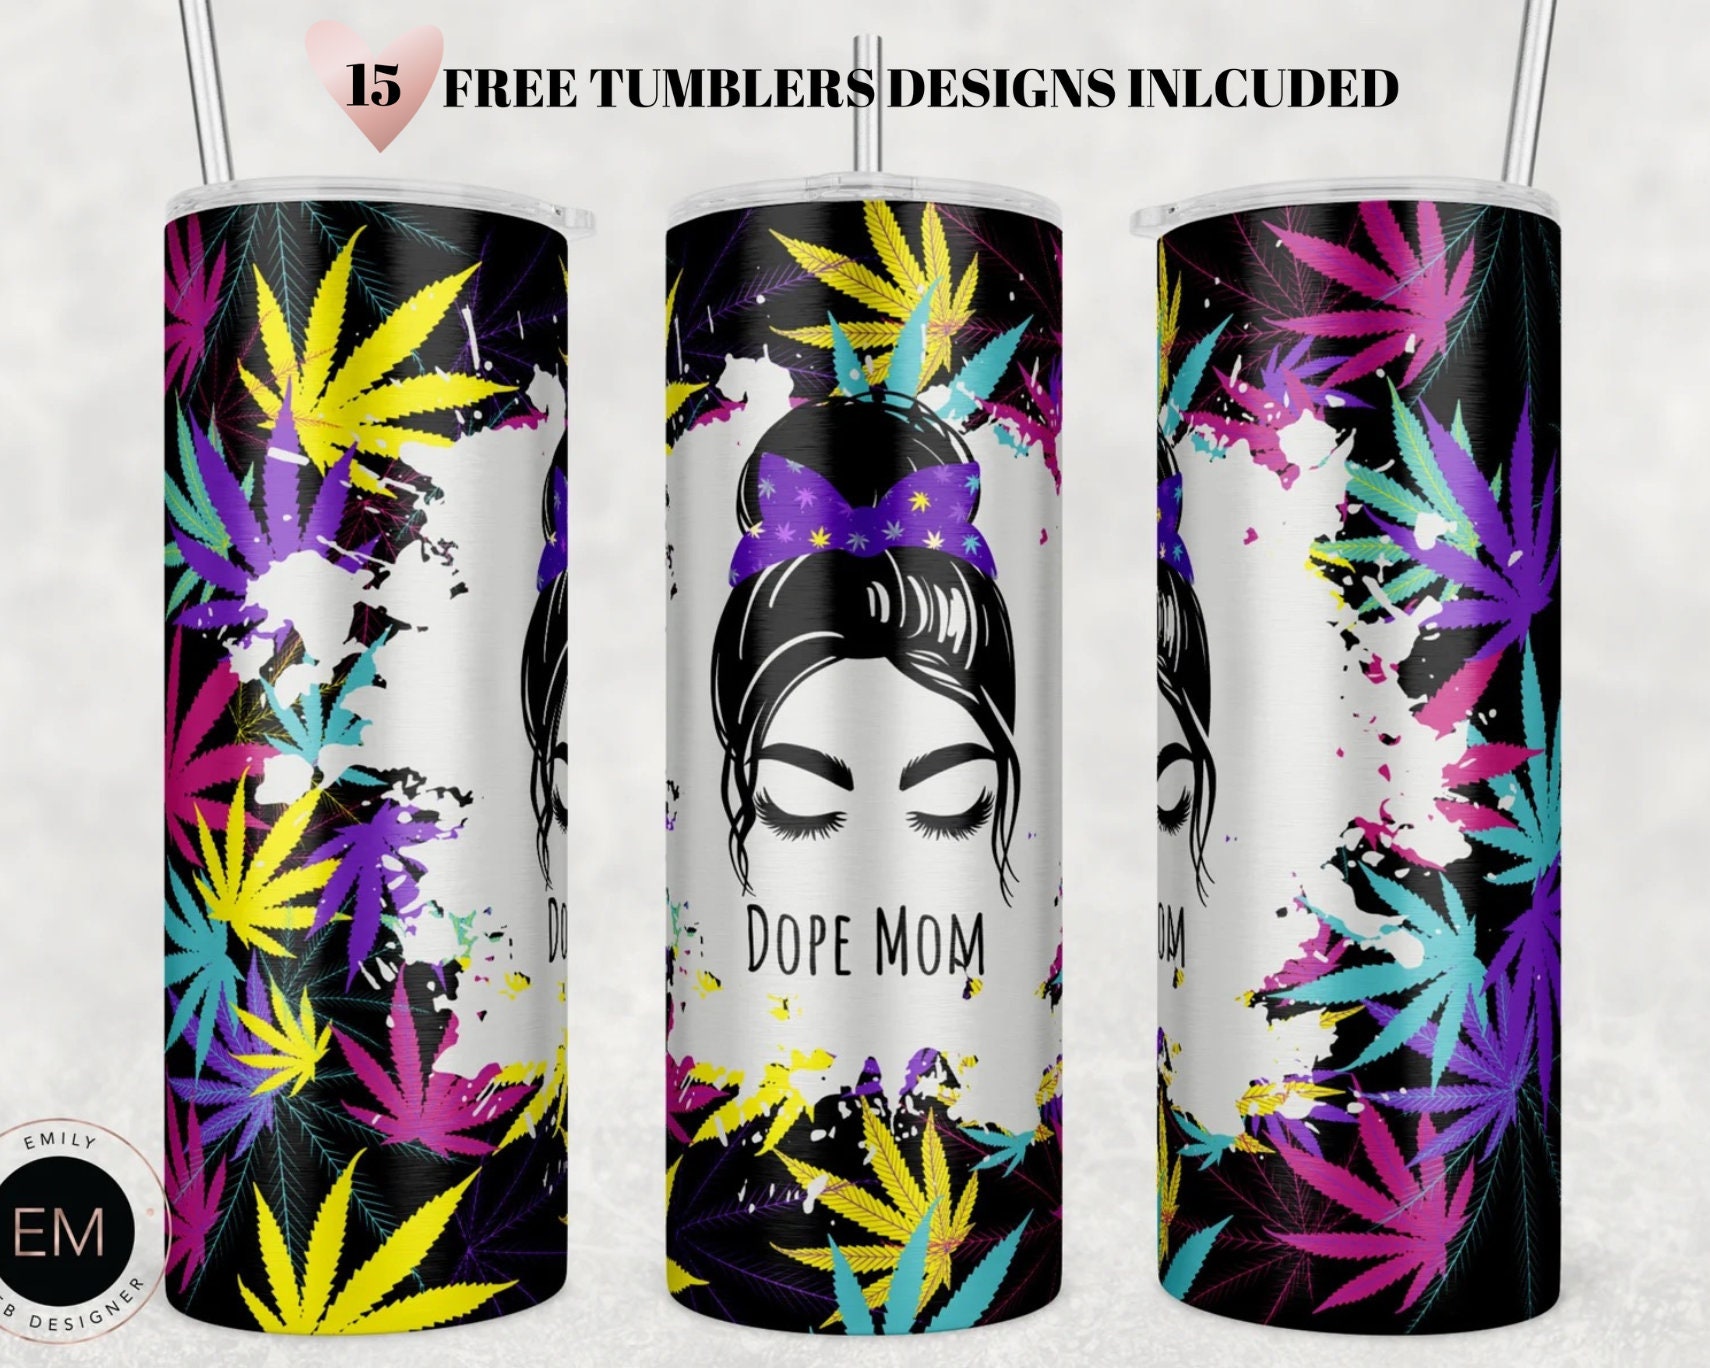 Mom Skull Weed Only Higher Funny Tumbler